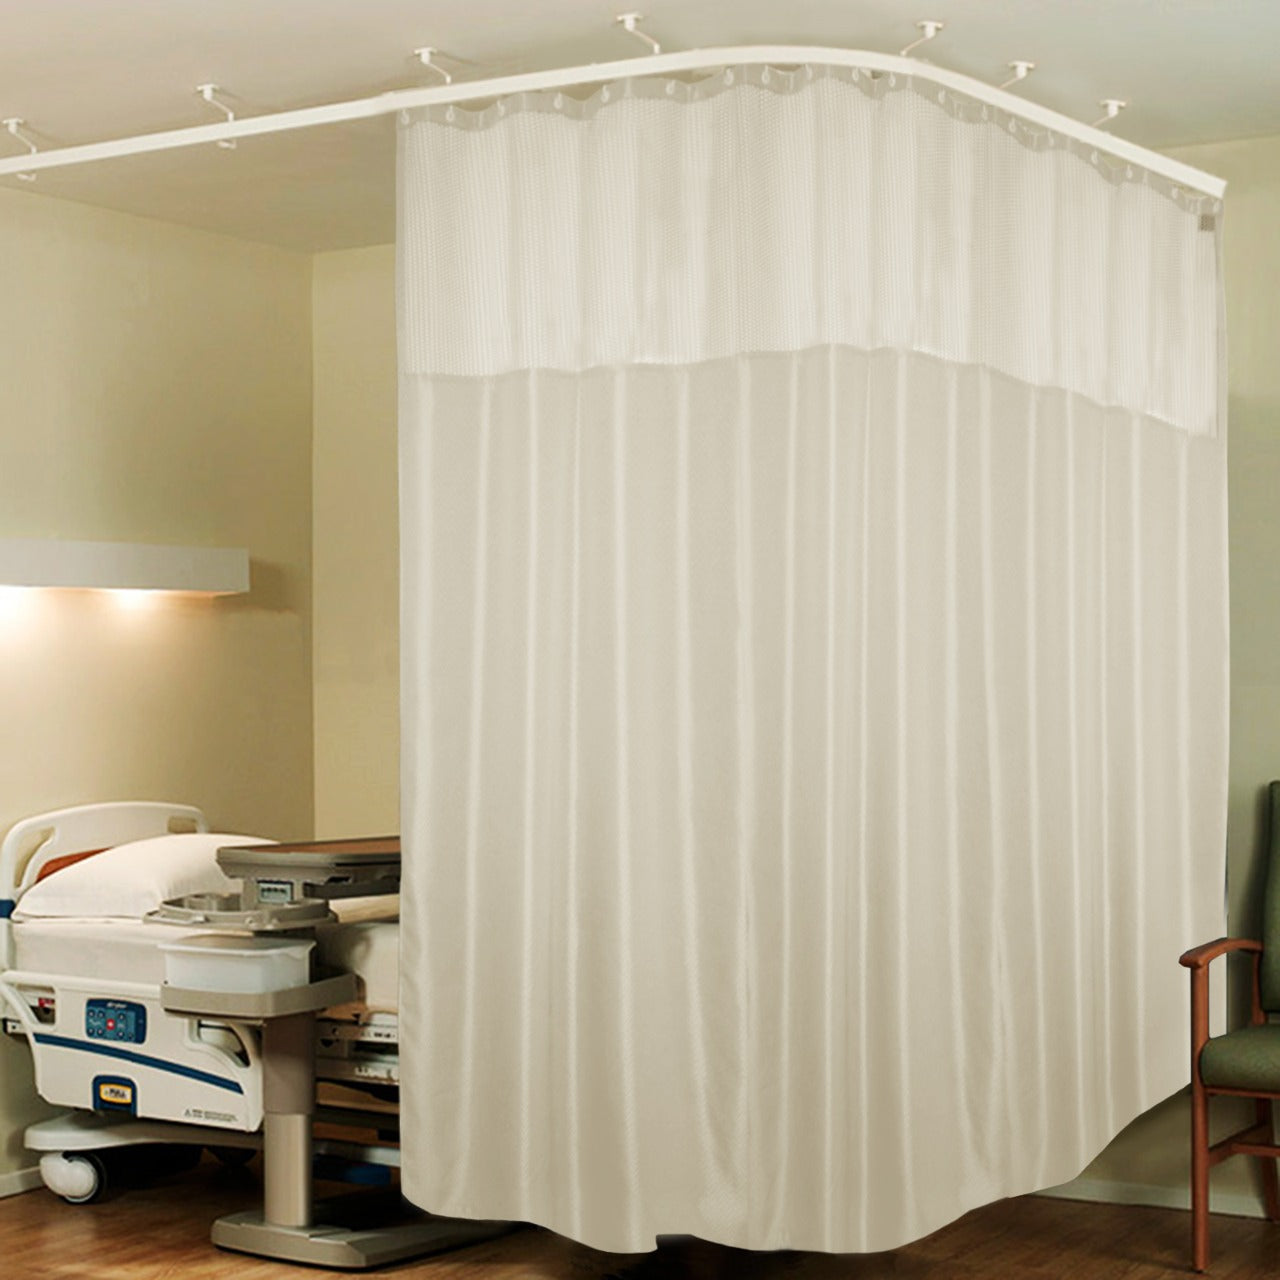 Hospital Partition Curtains, Clinic Curtains Size 16 FT W x 7 ft H, Channel Curtains with Net Fabric, 100% polyester 32 Rustfree Metal Eyelets 32 Plastic Hook, Cream,  Zig Zag (16x7 FT, Pk of 1)